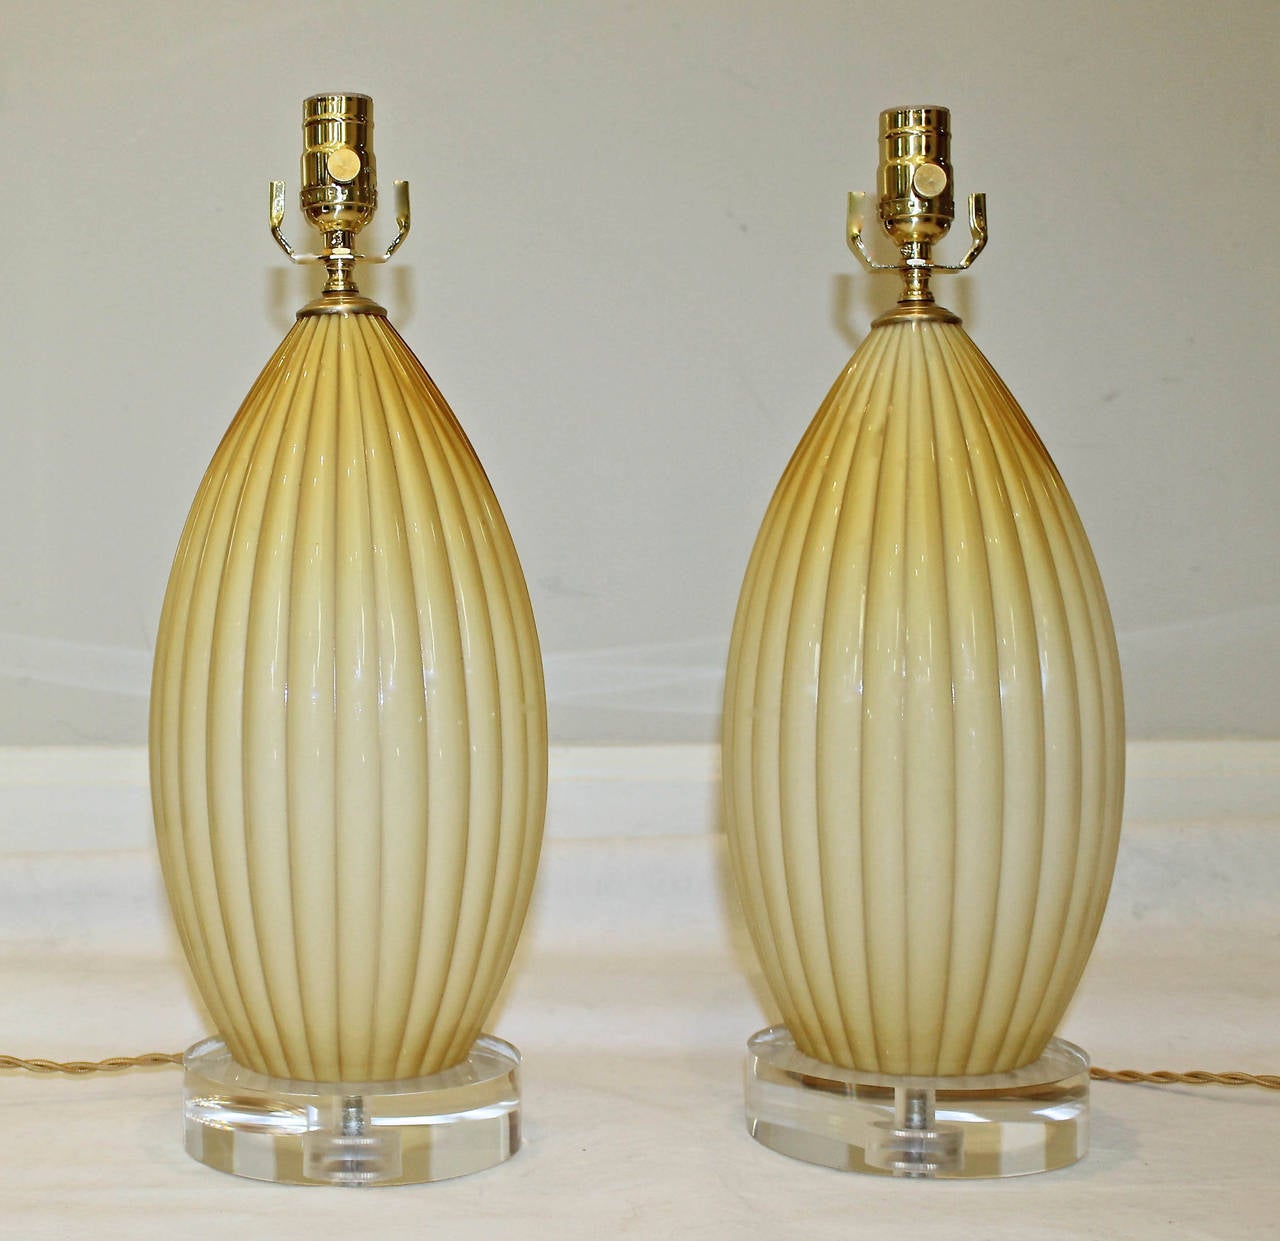 Pair of Murano cased glass lamps in a butterscotch color on new custom acrylic bases. Newly wired for US with French style twisted rayon covered cords, lacquered brass fittings and on/off sockets. 

Measures: 15